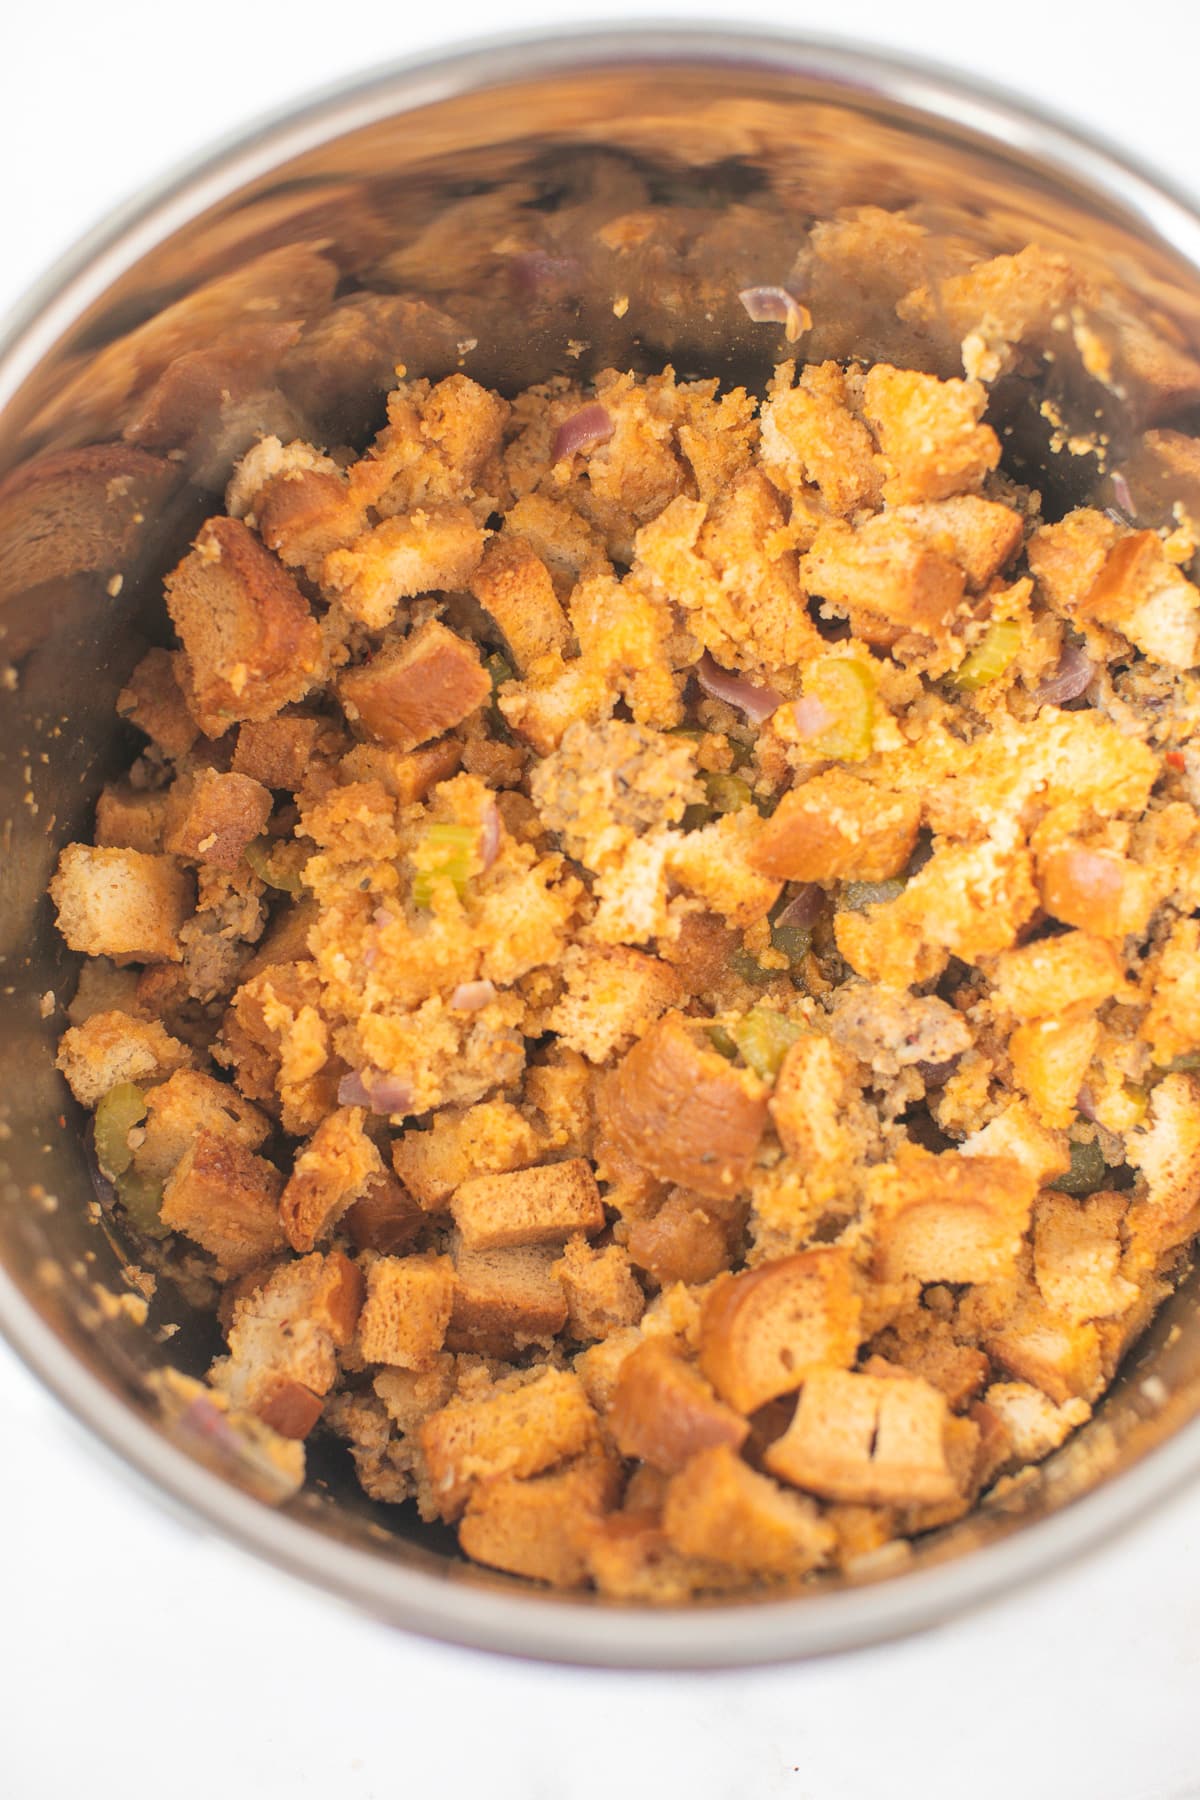 stuffing ingredients in the instant pot.